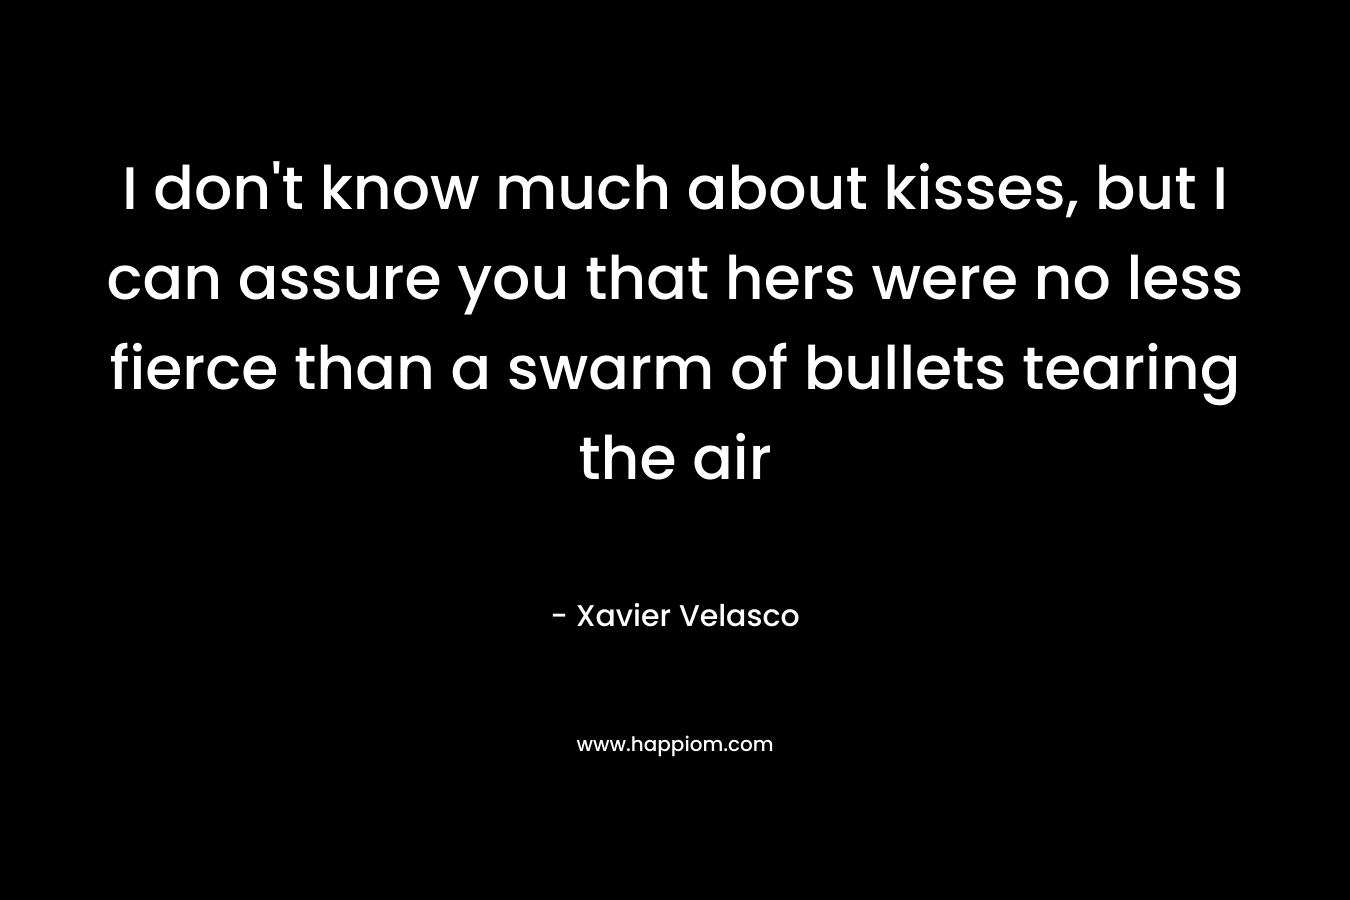 I don't know much about kisses, but I can assure you that hers were no less fierce than a swarm of bullets tearing the air